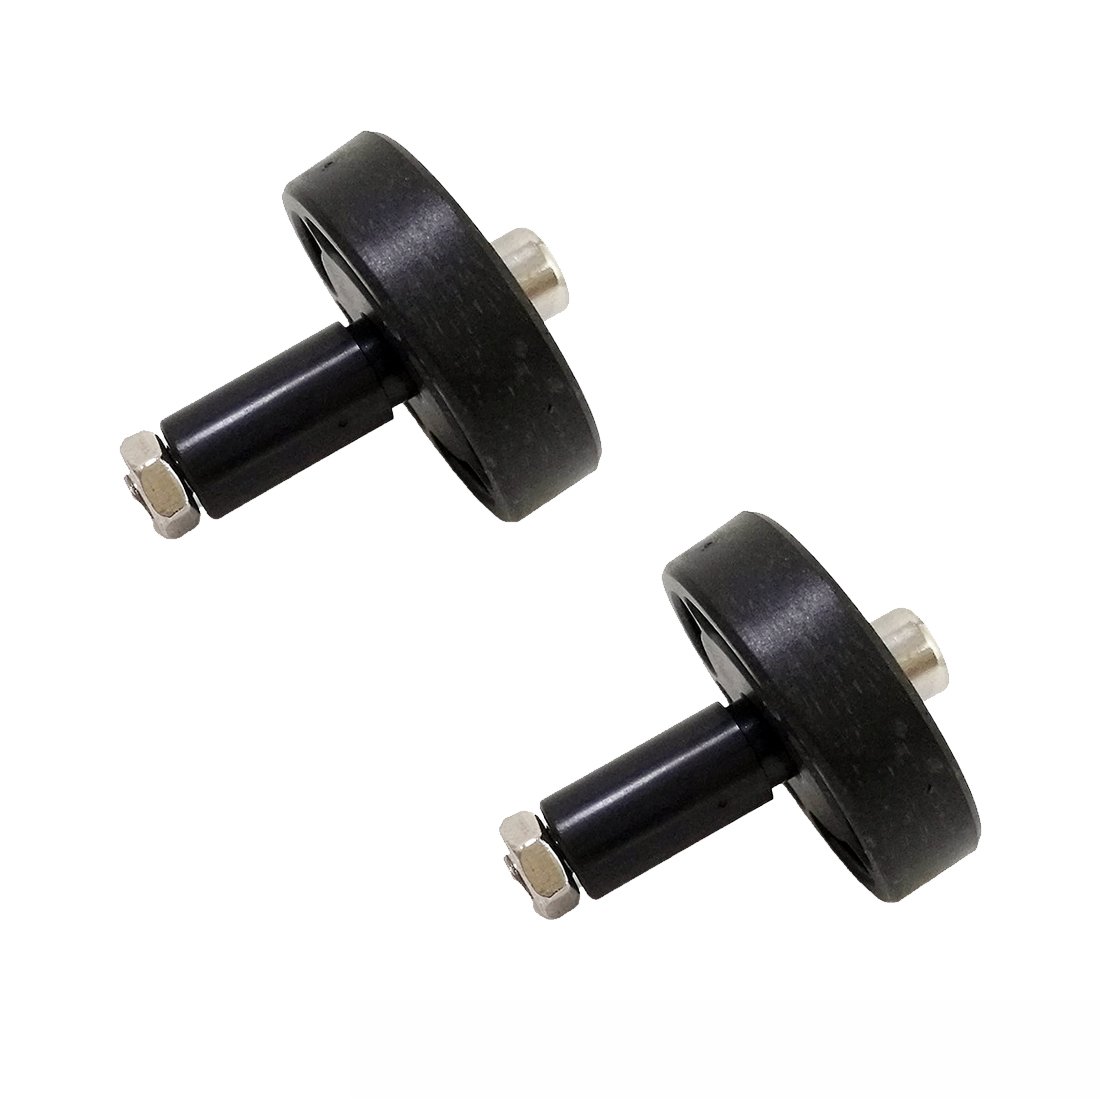 2Pcs Black Rubber Bearing Wheels for Chassis Tank Car 1